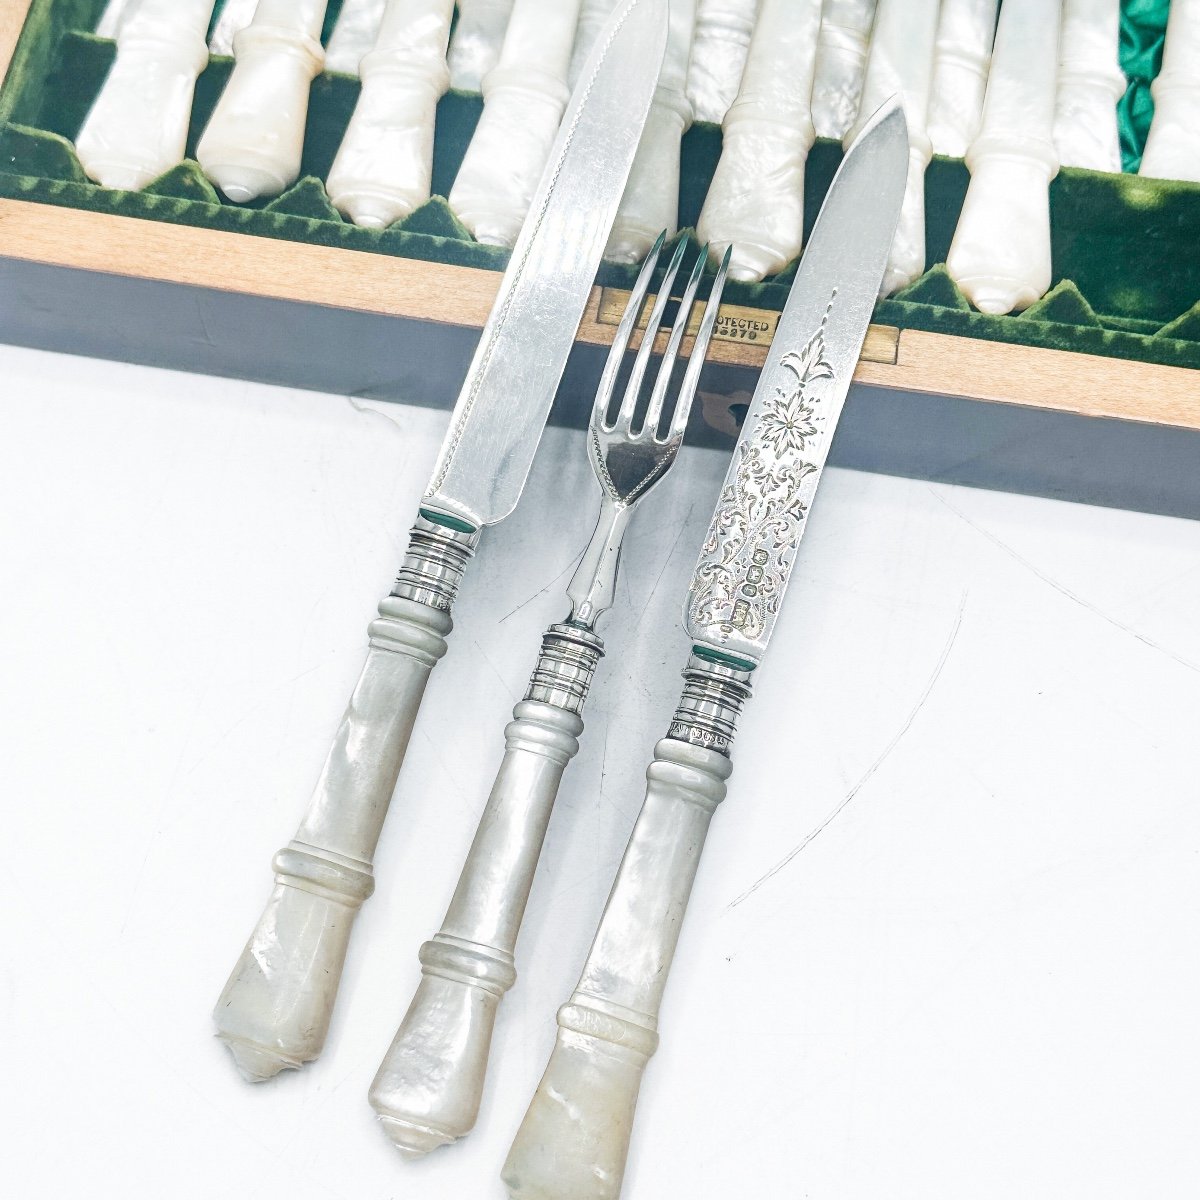 Set Of Fish Cutlery For 12 People Sterling Silver And Mother-of-pearl Handles -photo-4